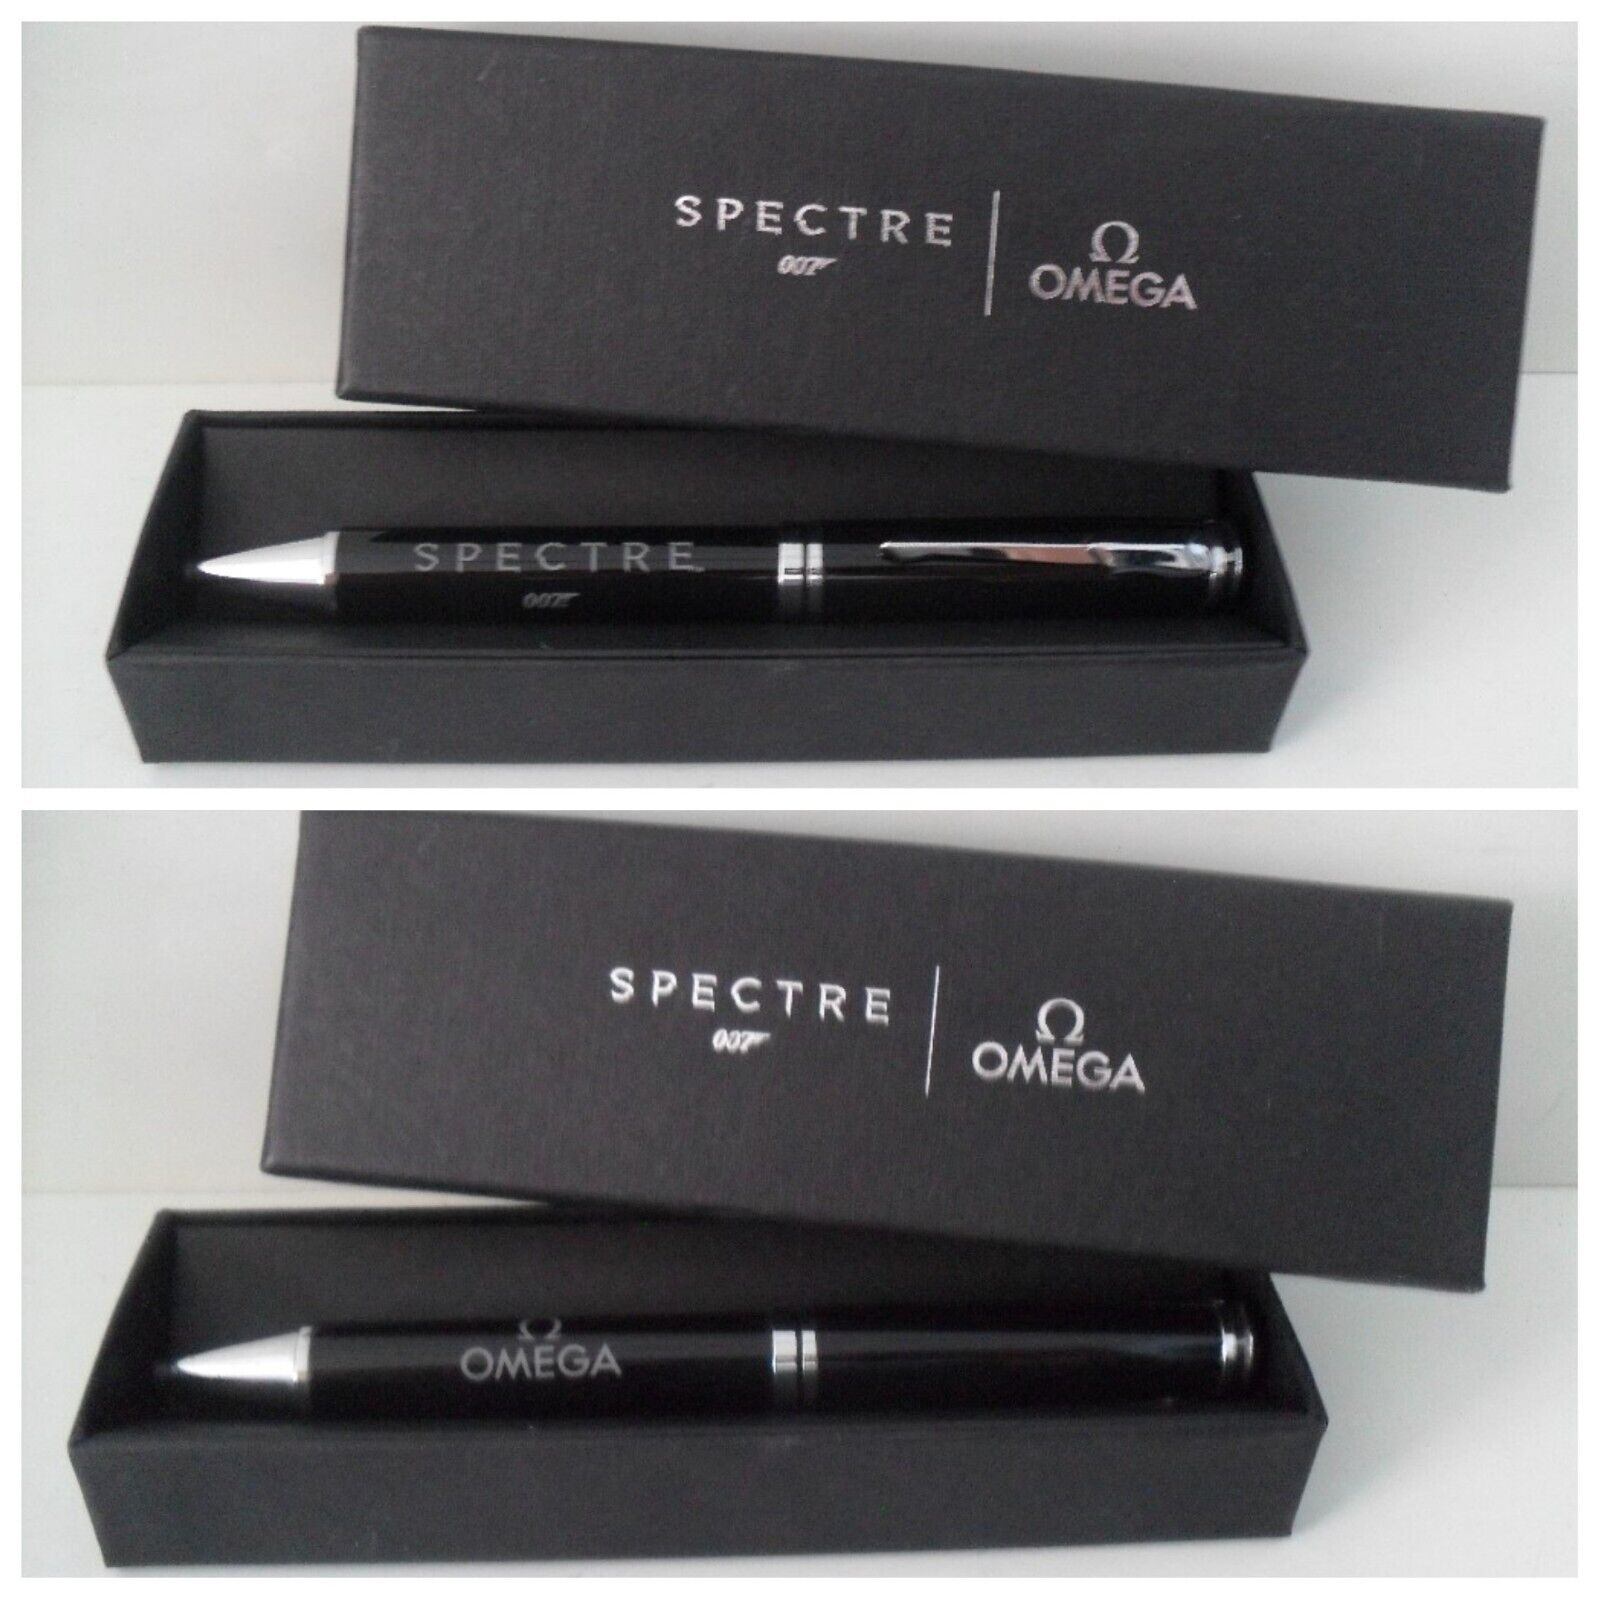 OMEGA Watch Pen Authentic RARE OMEGA Spectre 007 Pen With Spectre Gift Box